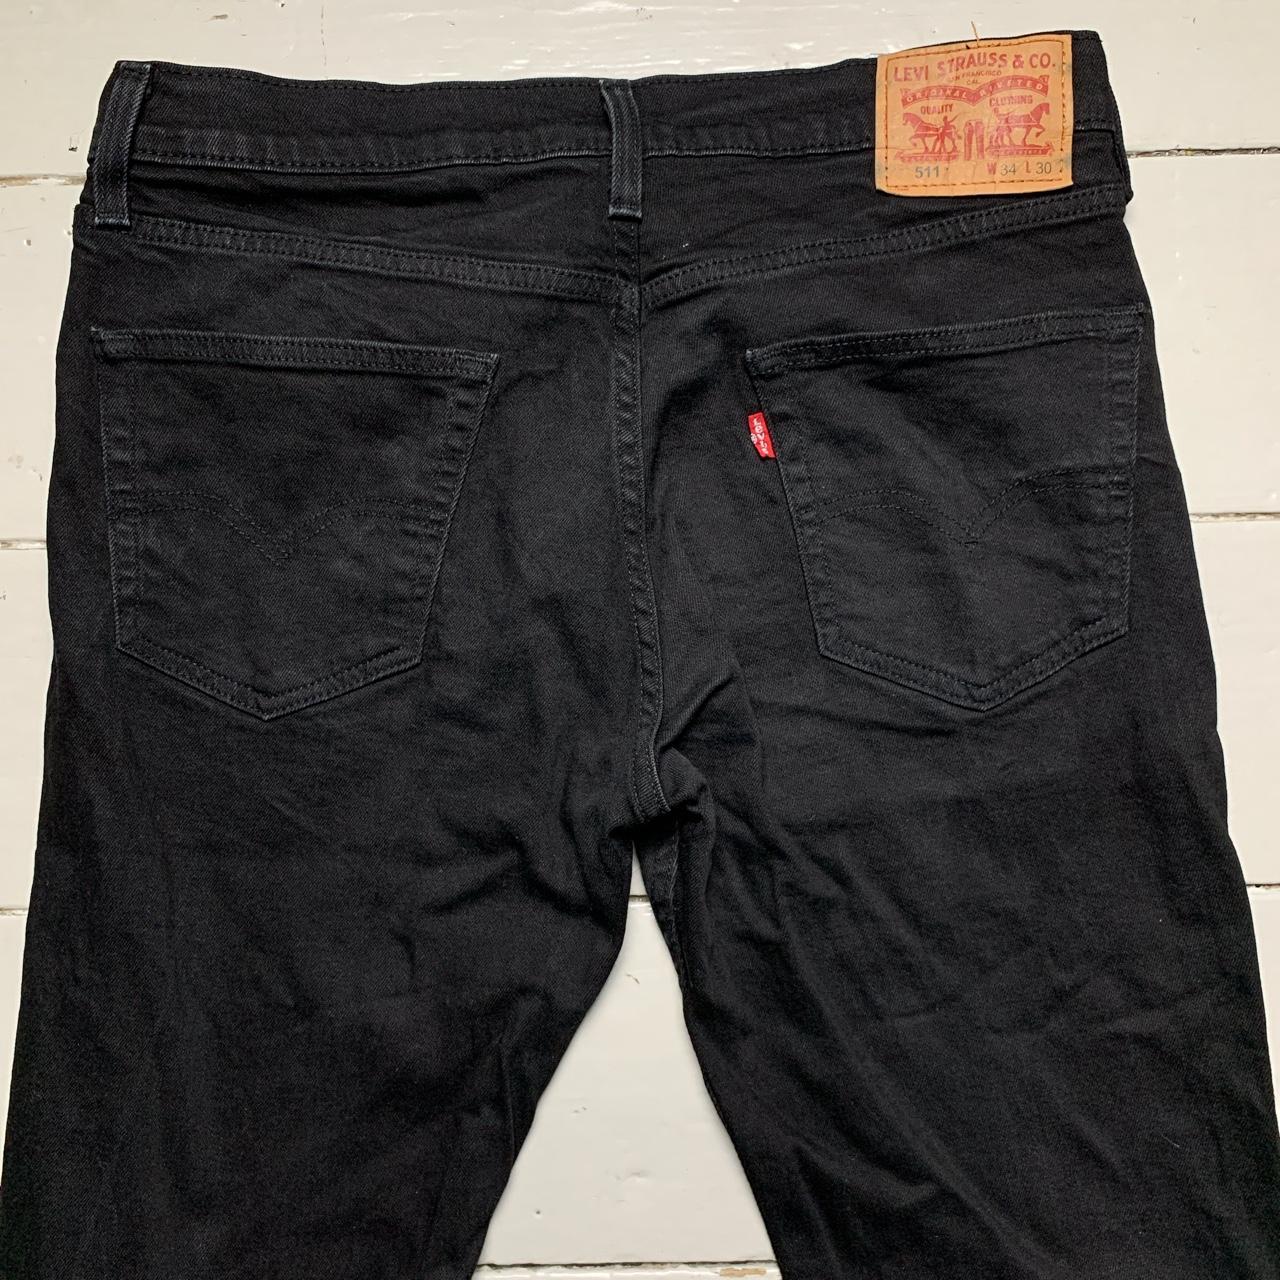 Levis 511 Black Jeans 👖 In great condition with... - Depop